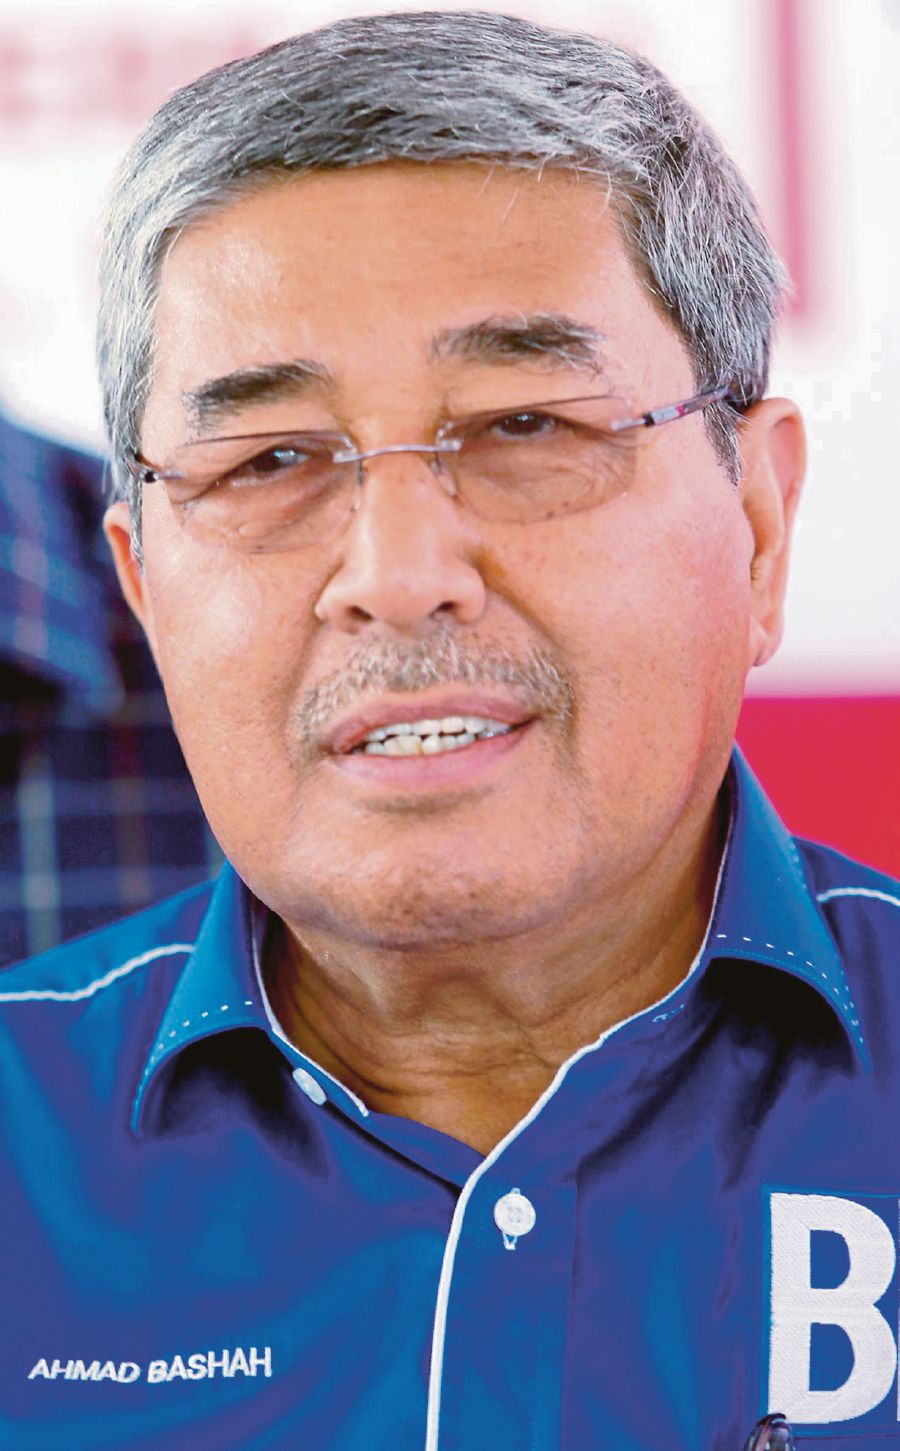 Kedah Menteri Besar Datuk Seri Ahmad Bashah Md Hanipah says the full list of state Barisan Nasional candidates will be announced after getting the approval from party’s chairman Datuk Seri Najib Razak. Pic by AMRAN HAMID 